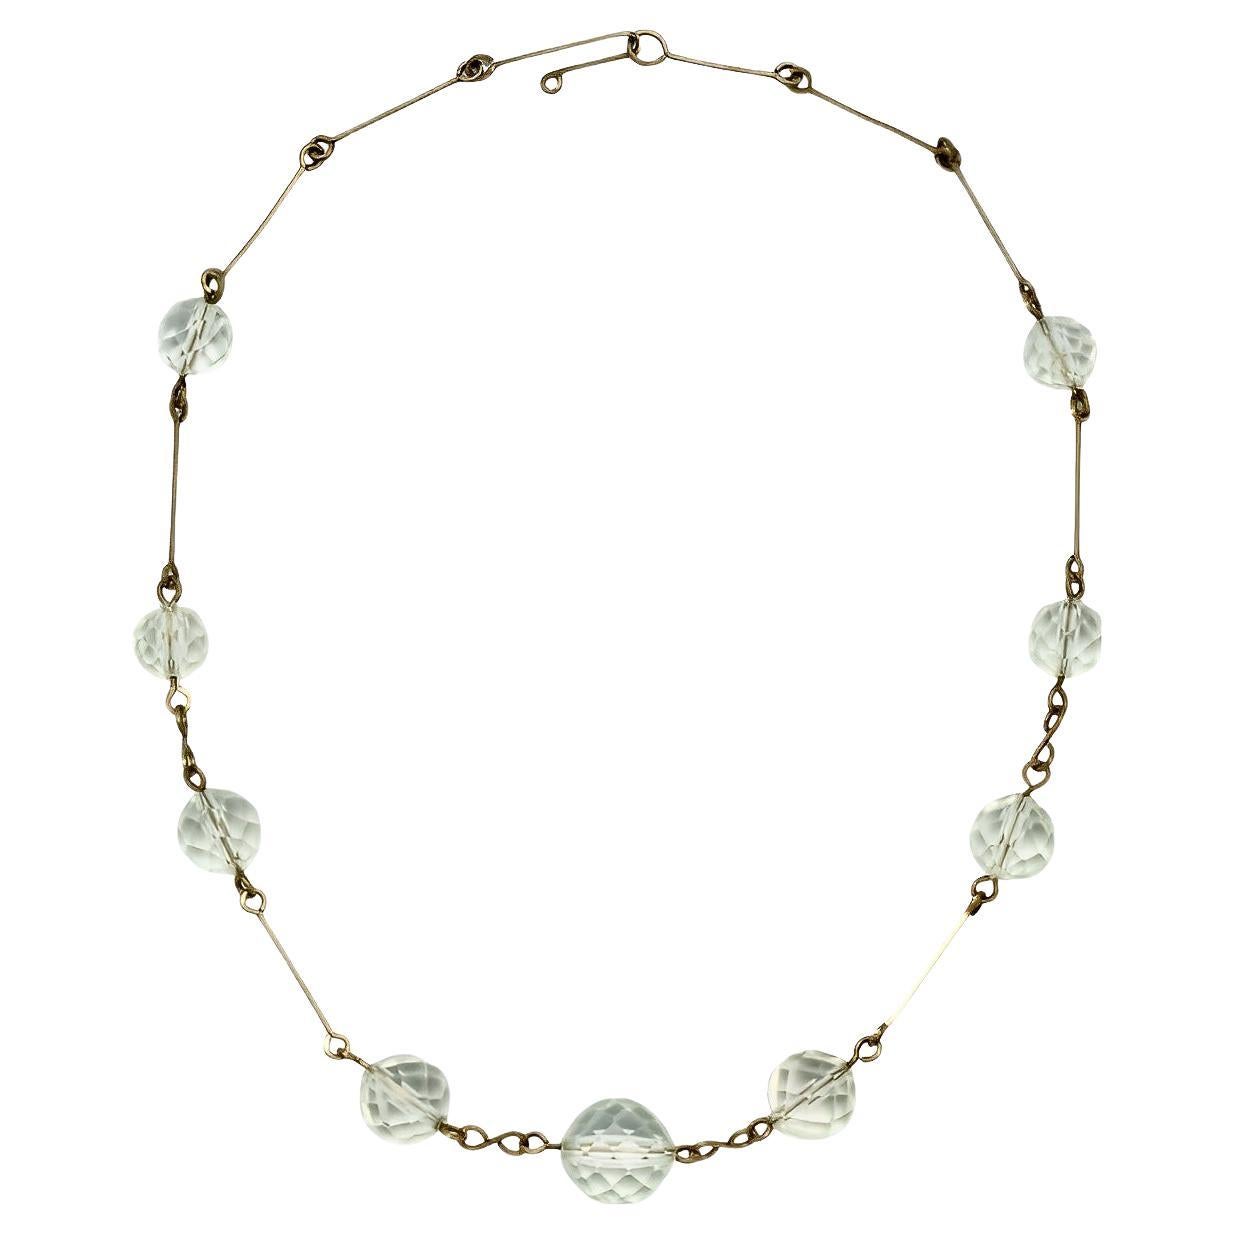 Art Deco Gold Tone Wire Necklace with Clear Faceted Crystal Beads circa 1930s